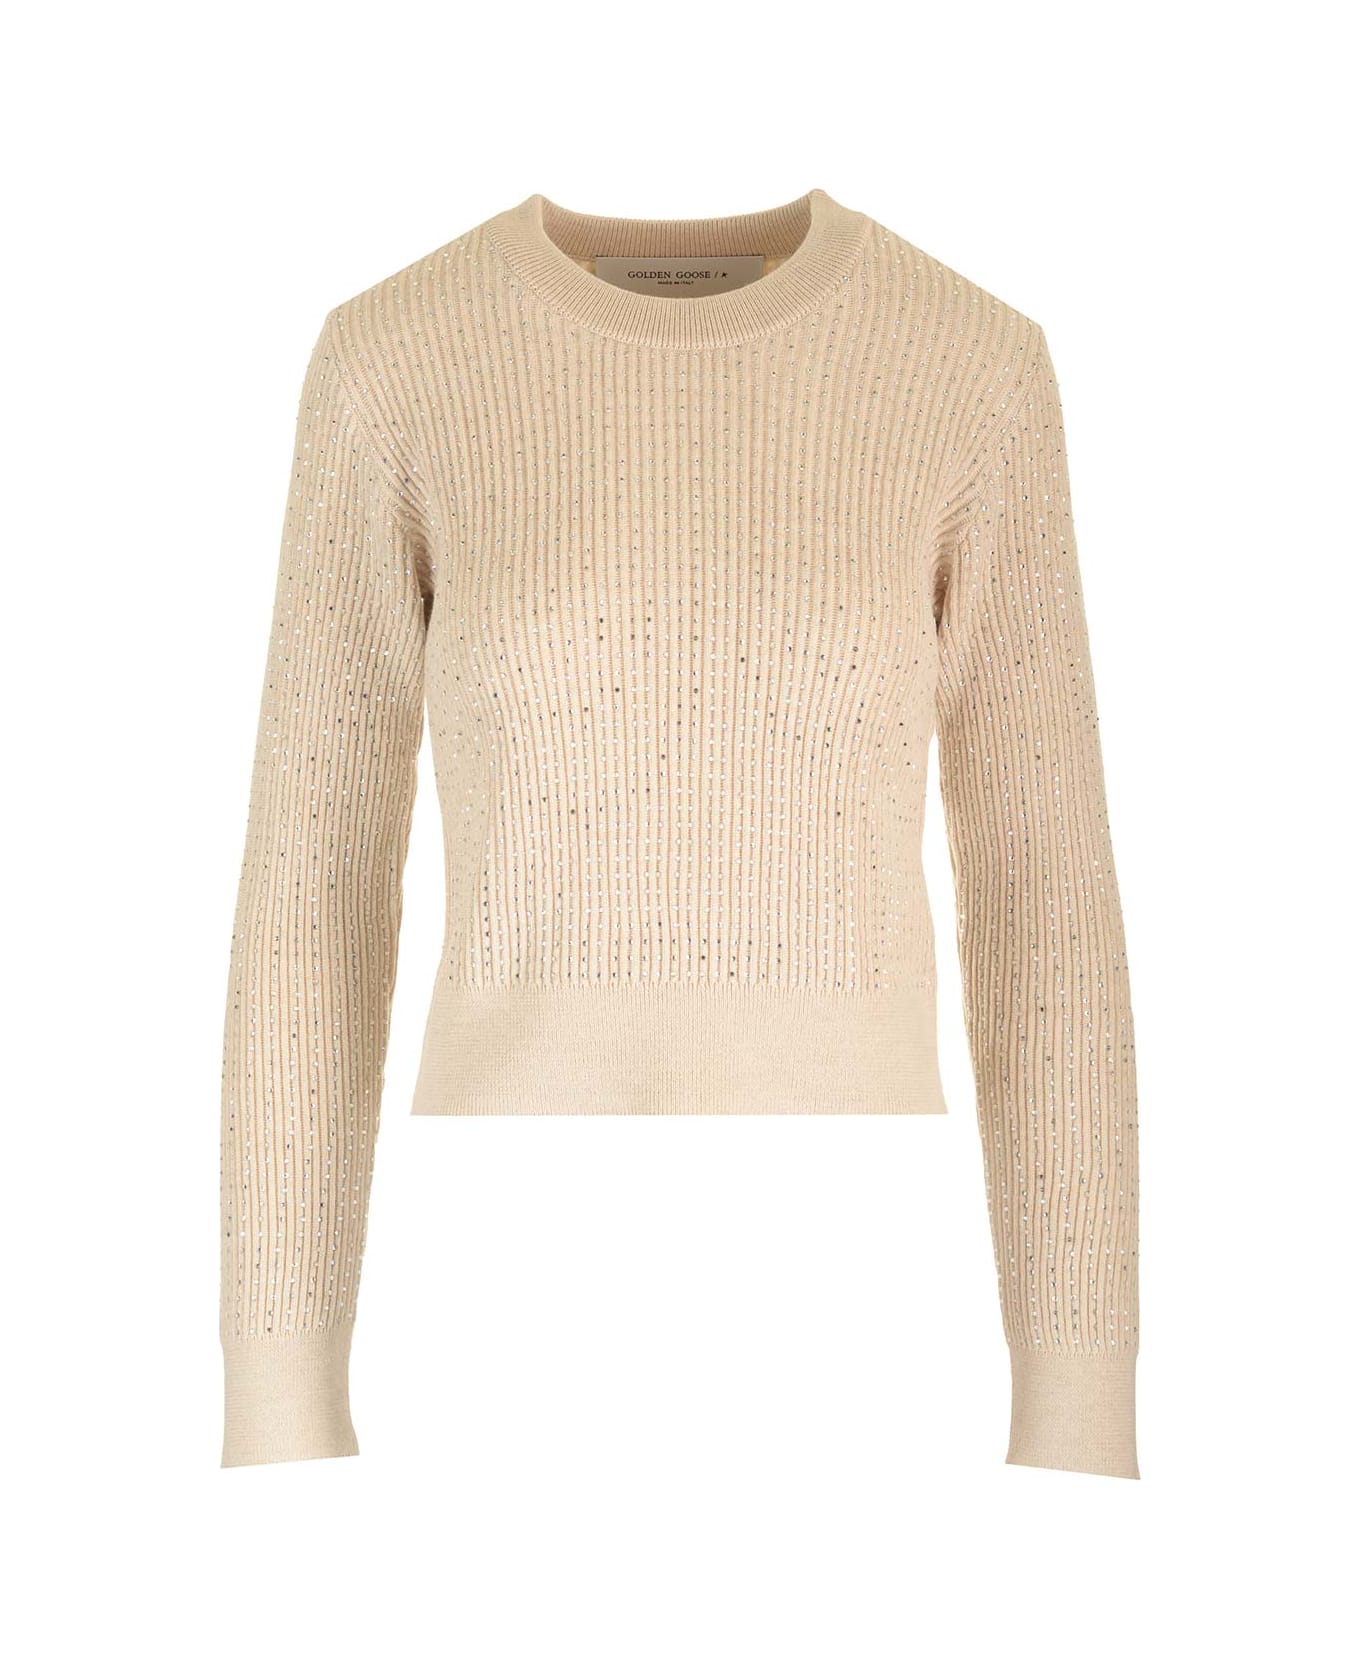 Golden Goose Ribbed Wool Sweater - Nude ニットウェア